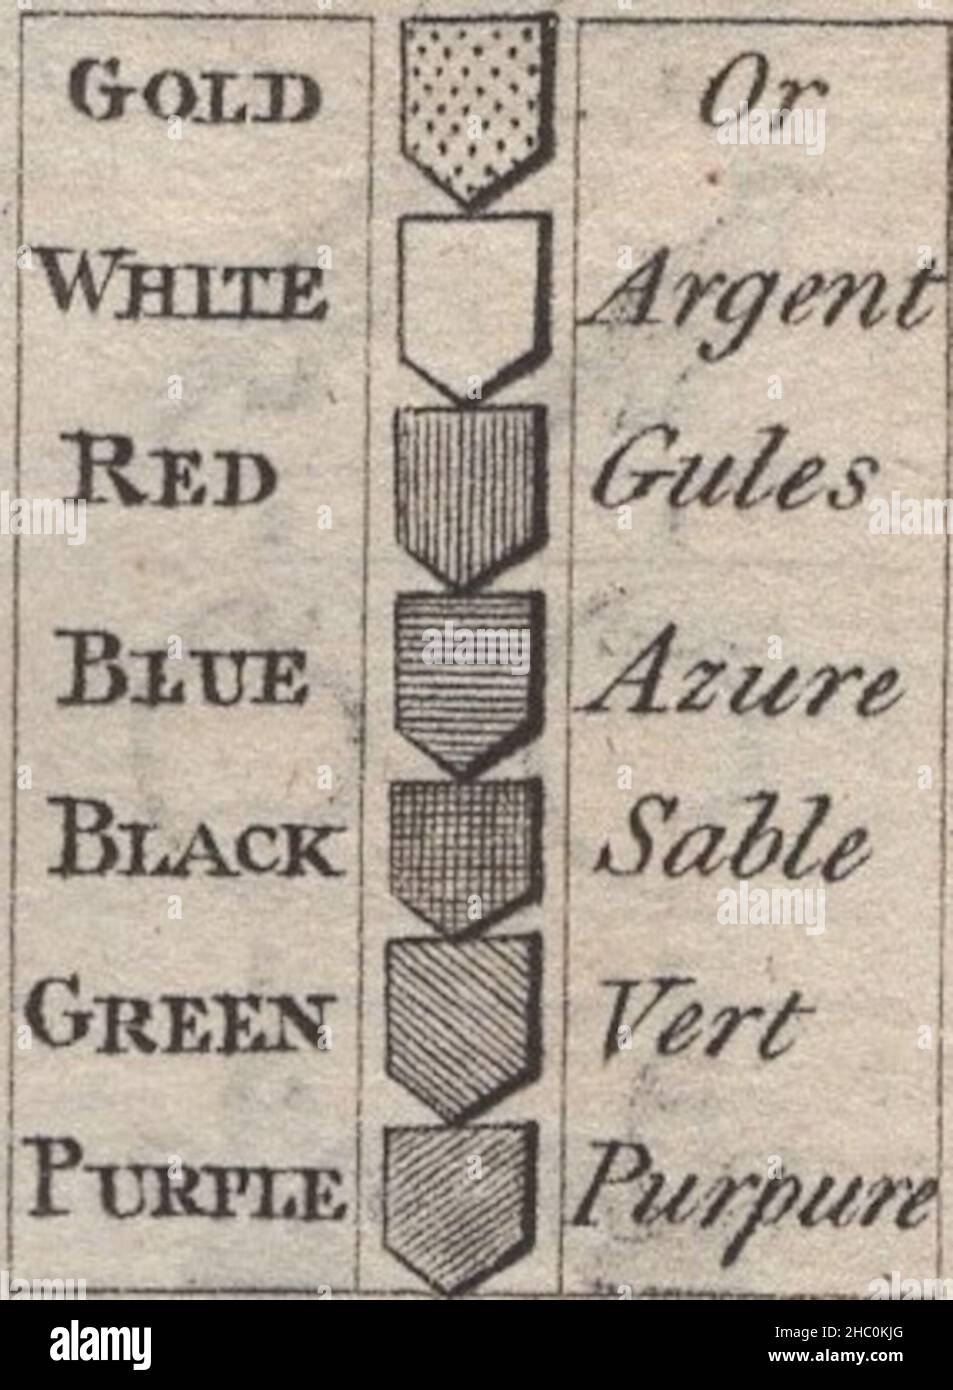 antique 18th century engraving heraldy coat of arms, English Heraldic Bearing, Type: Gold - or, White - Argent, Red - Gules, Blue - Azure, Black - Sable, Green - Vert, Purple - purpure  by Woodman & Mutlow fc russel co circa 1780s Source: original engravings from  the annual almanach book. Stock Photo